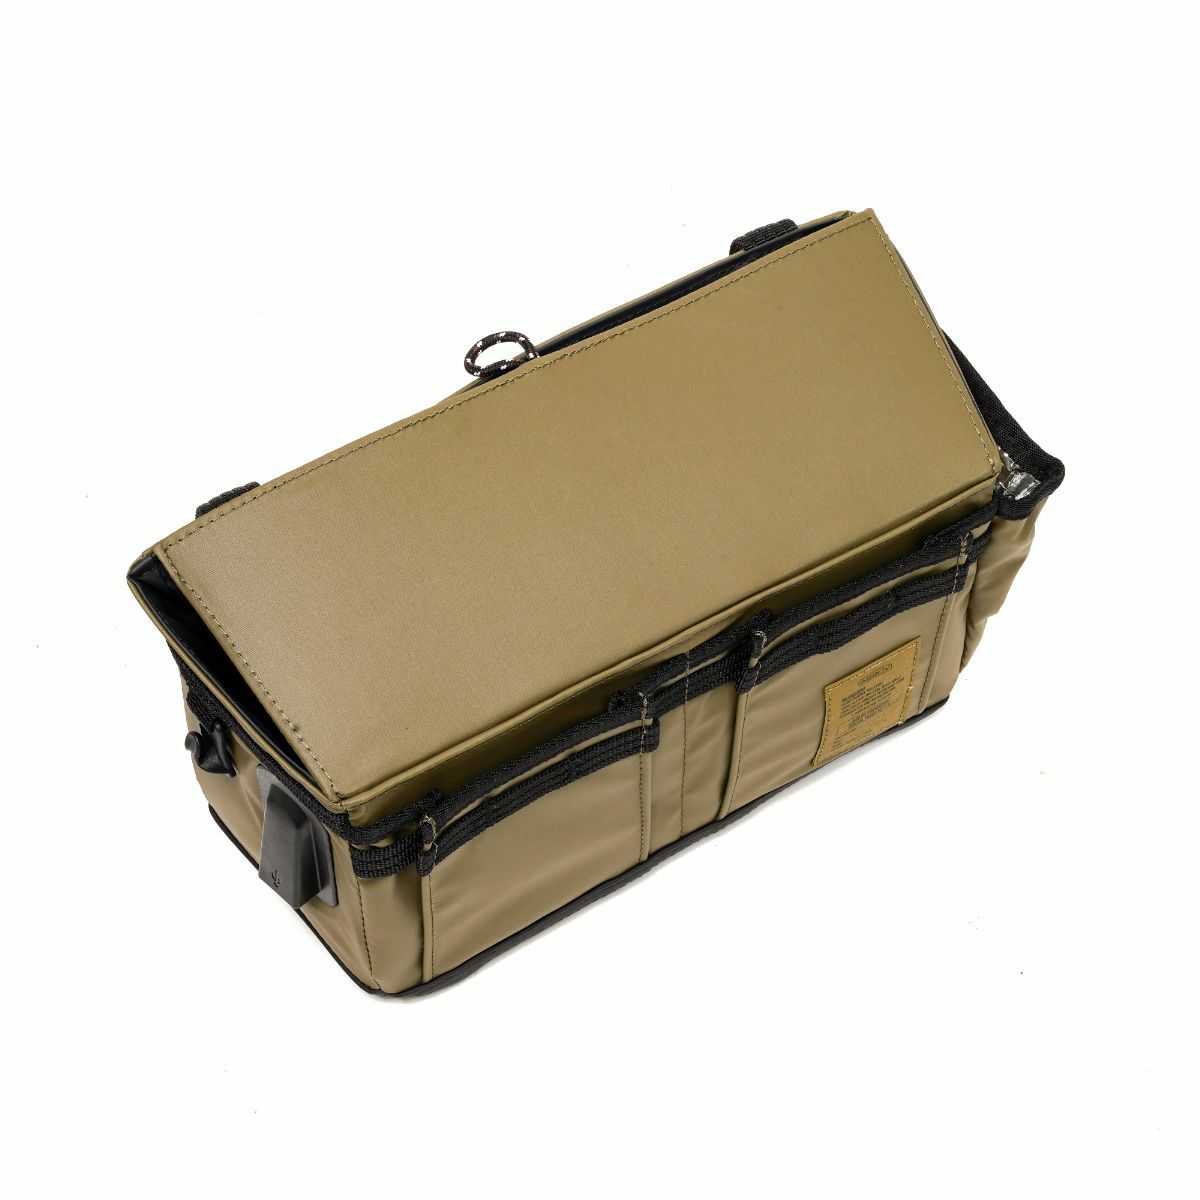 AS2OV – POLYCA SIDE CONTAINER 25